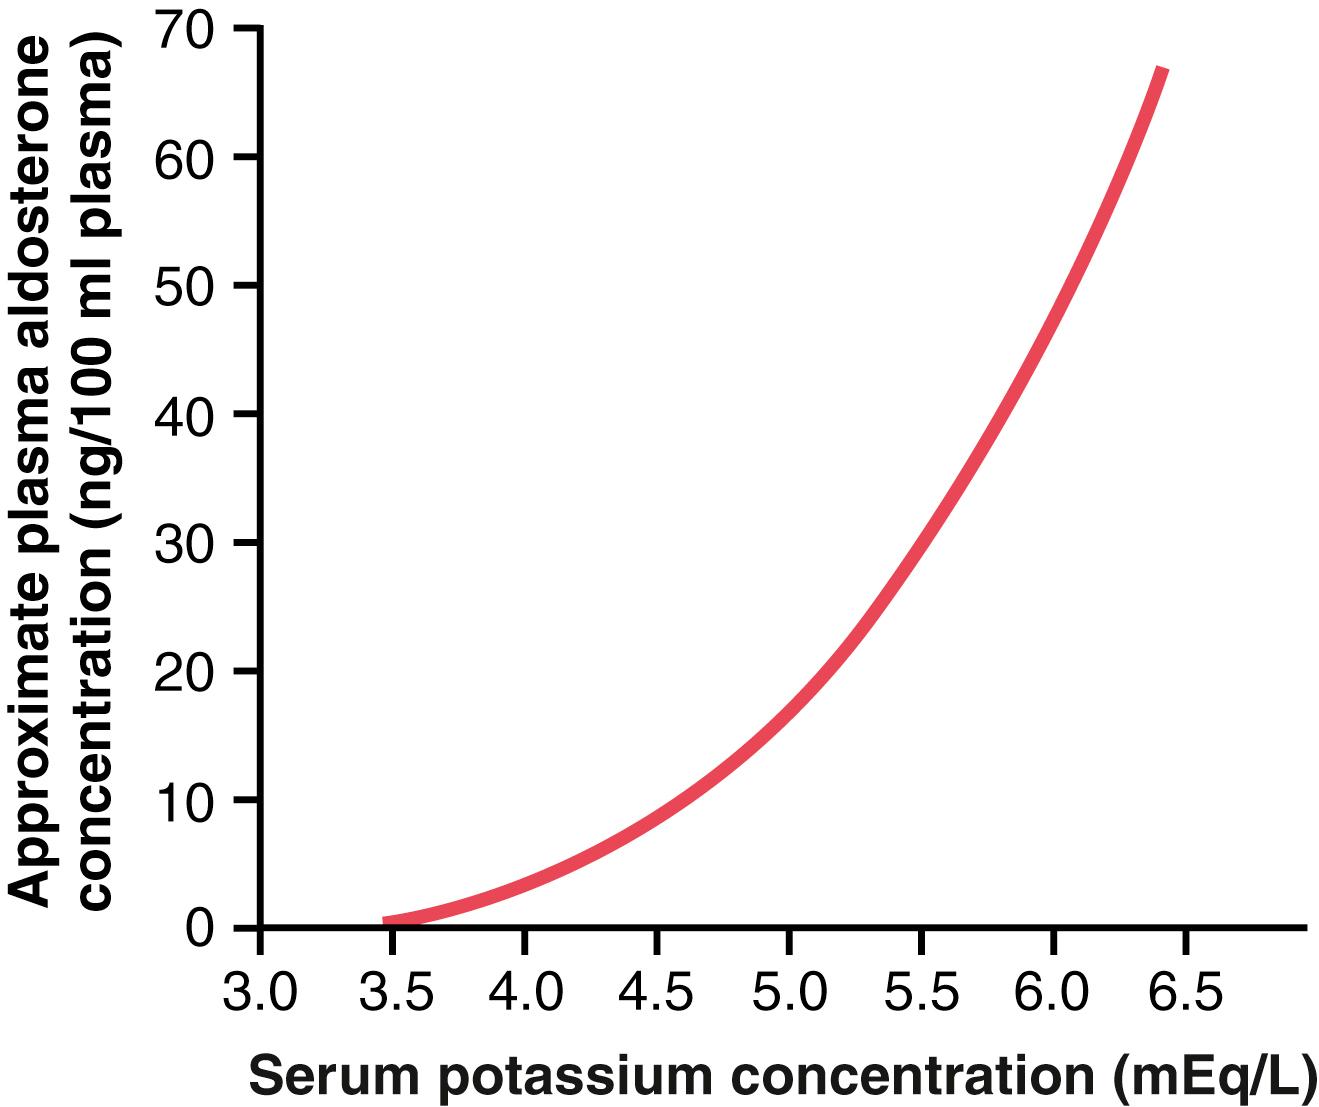 Figure 30-5, Effect of extracellular fluid potassium ion concentration on plasma aldosterone concentration. Note that small changes in potassium concentration cause large changes in aldosterone concentration.